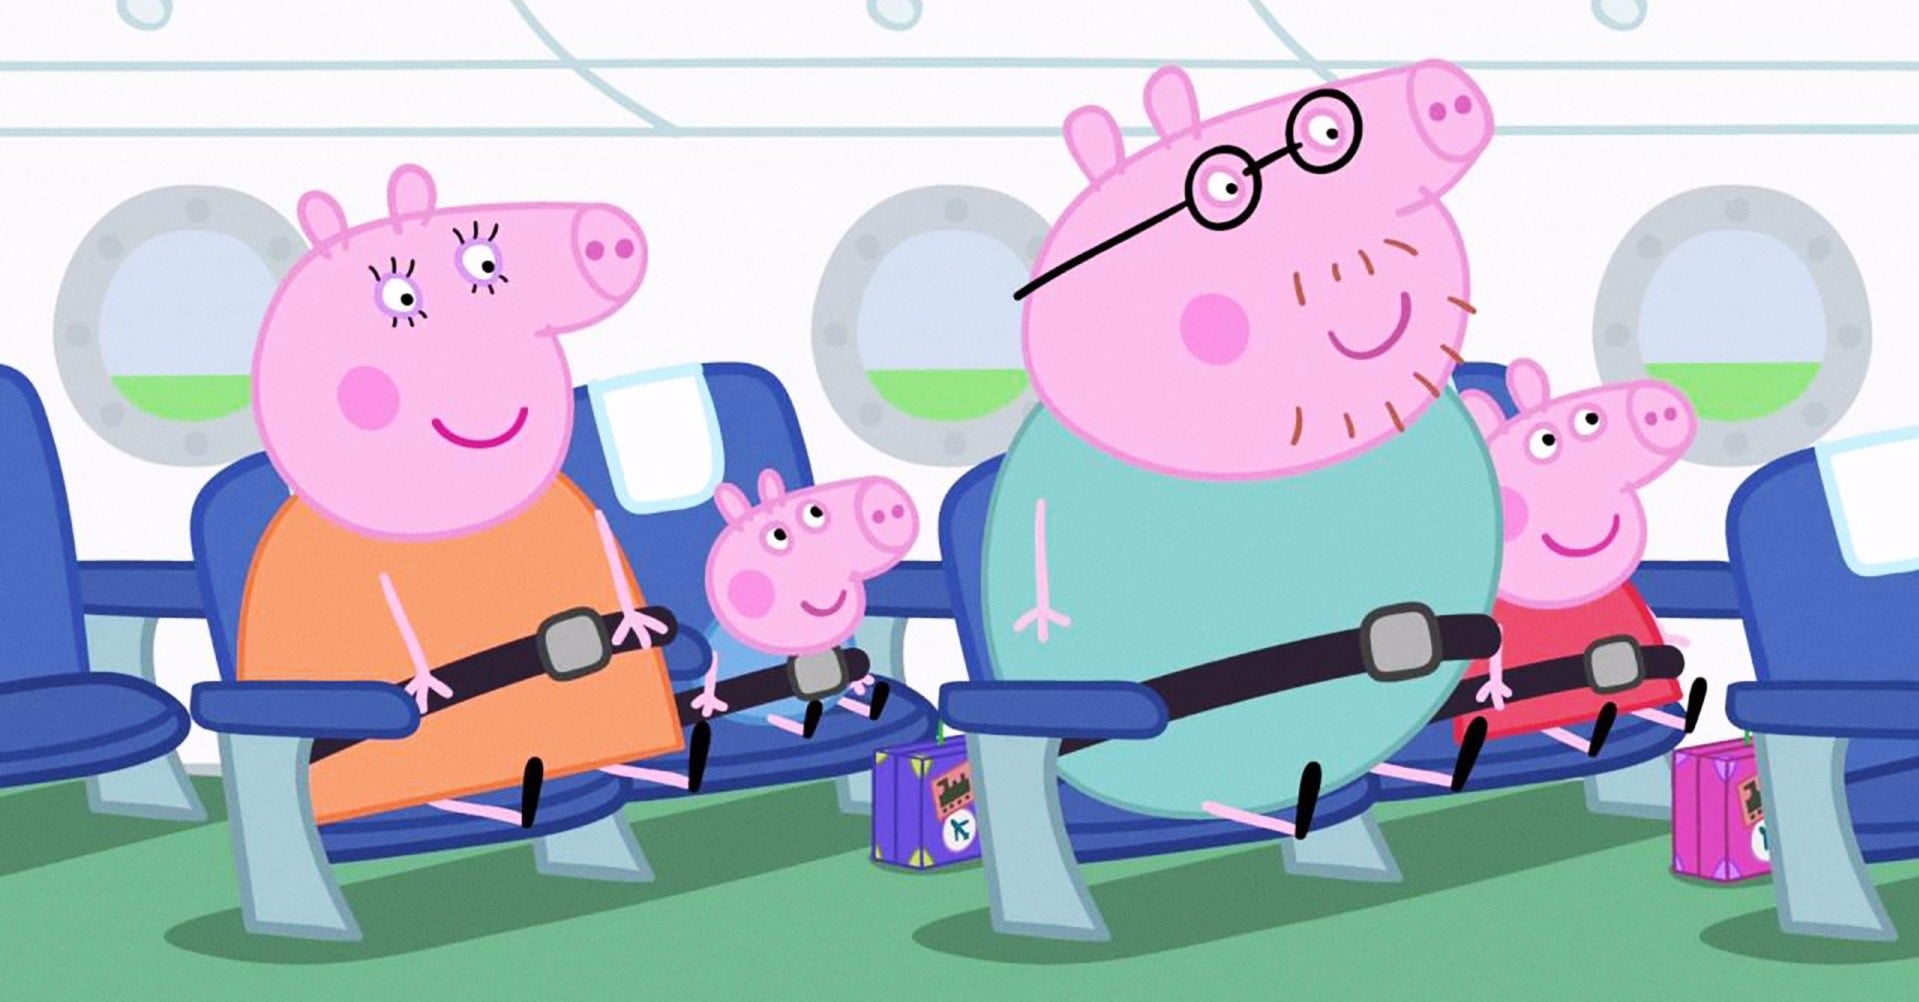 Why Peppa Pig Is the Worst